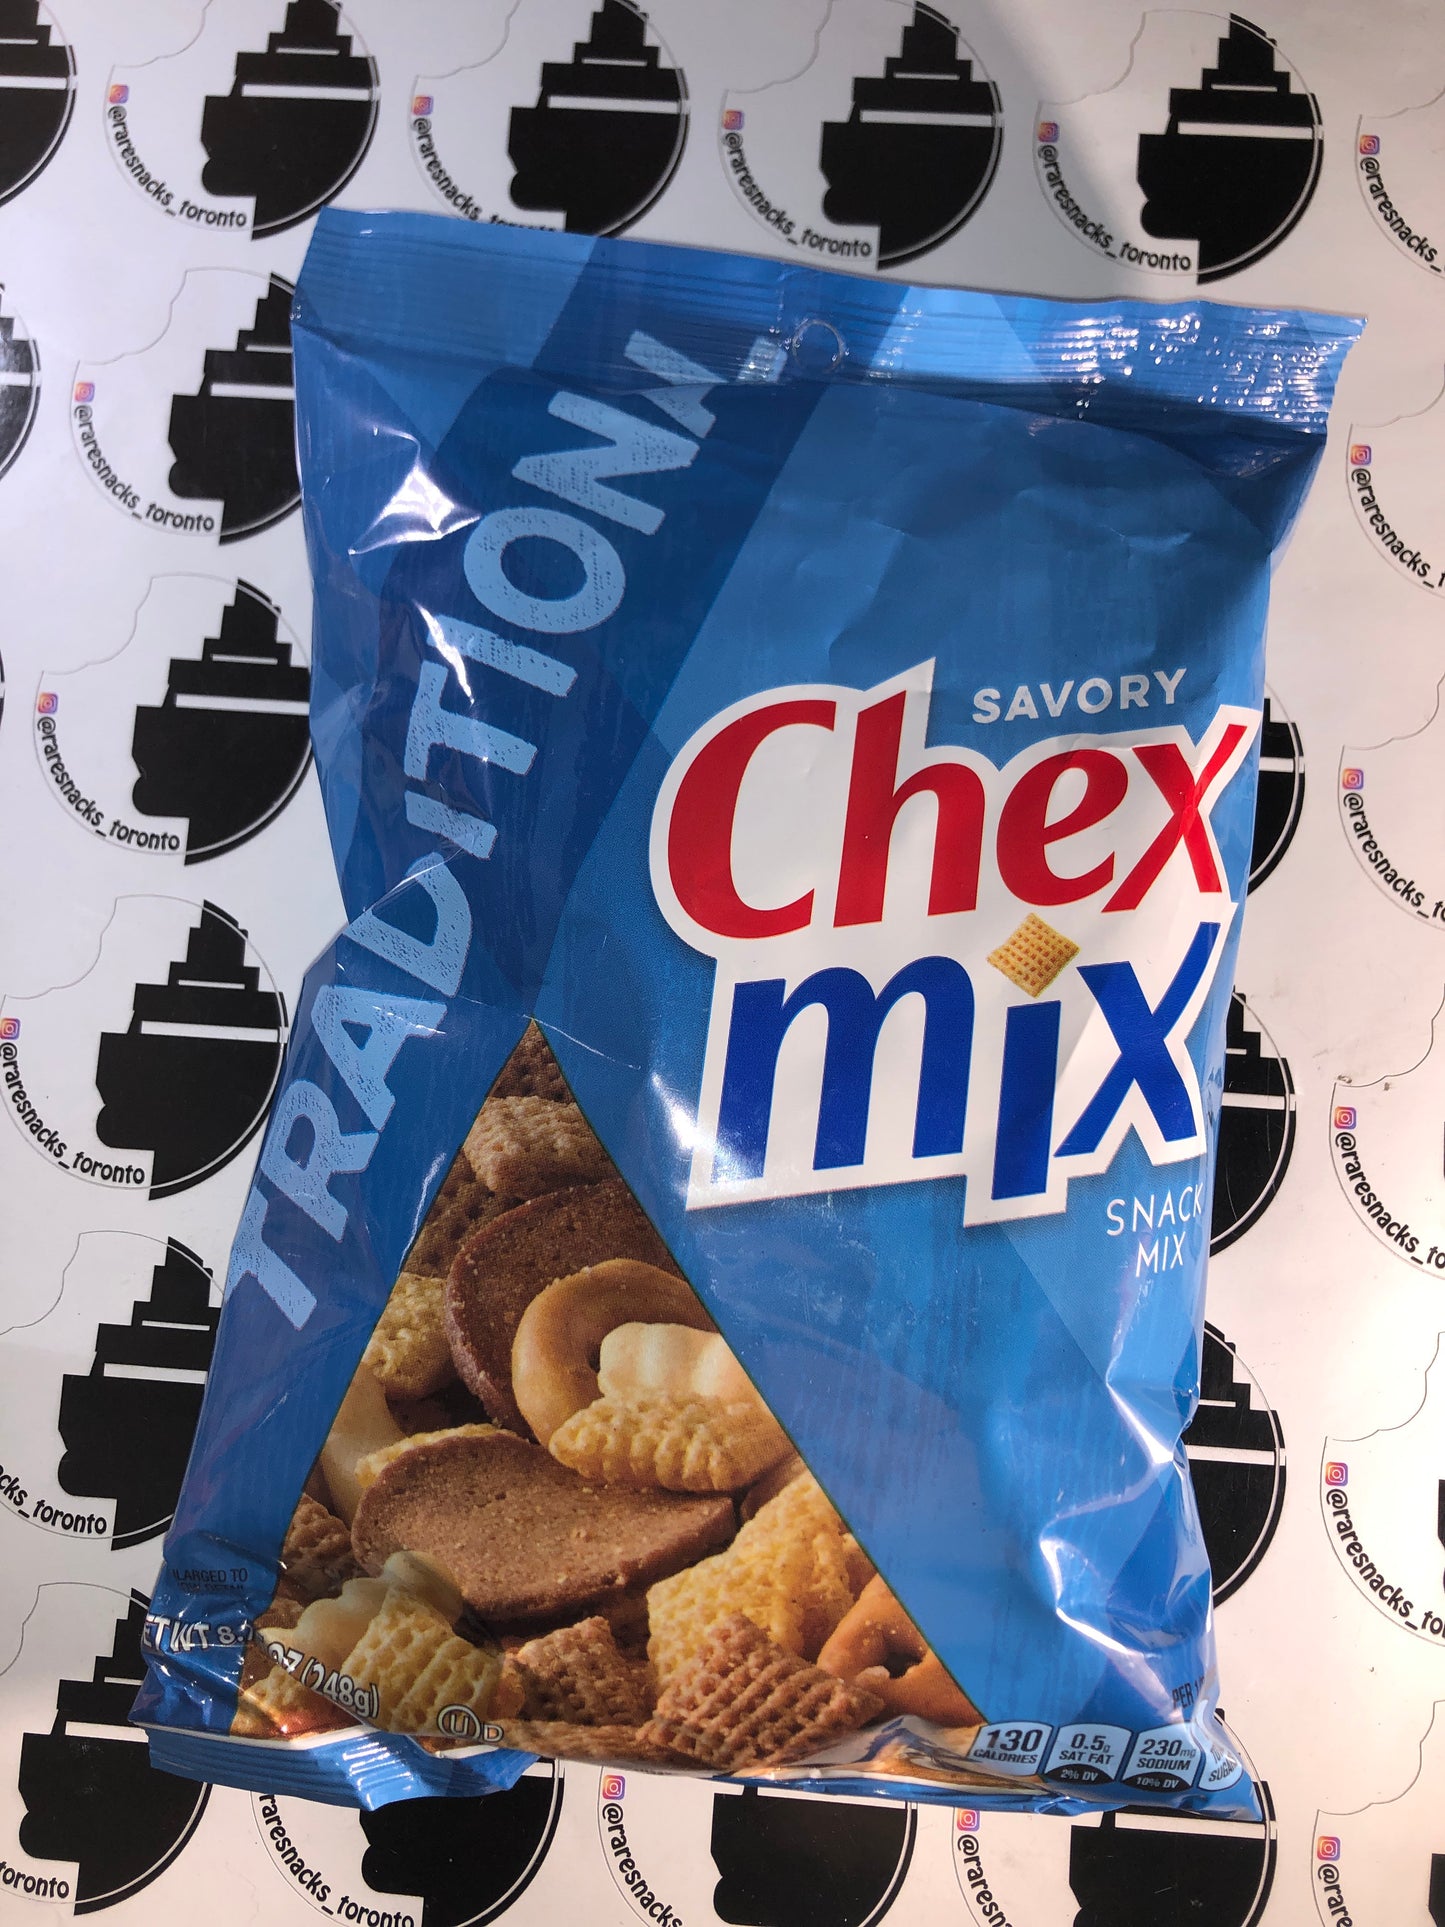 Chex Mix Traditional 8.75oz